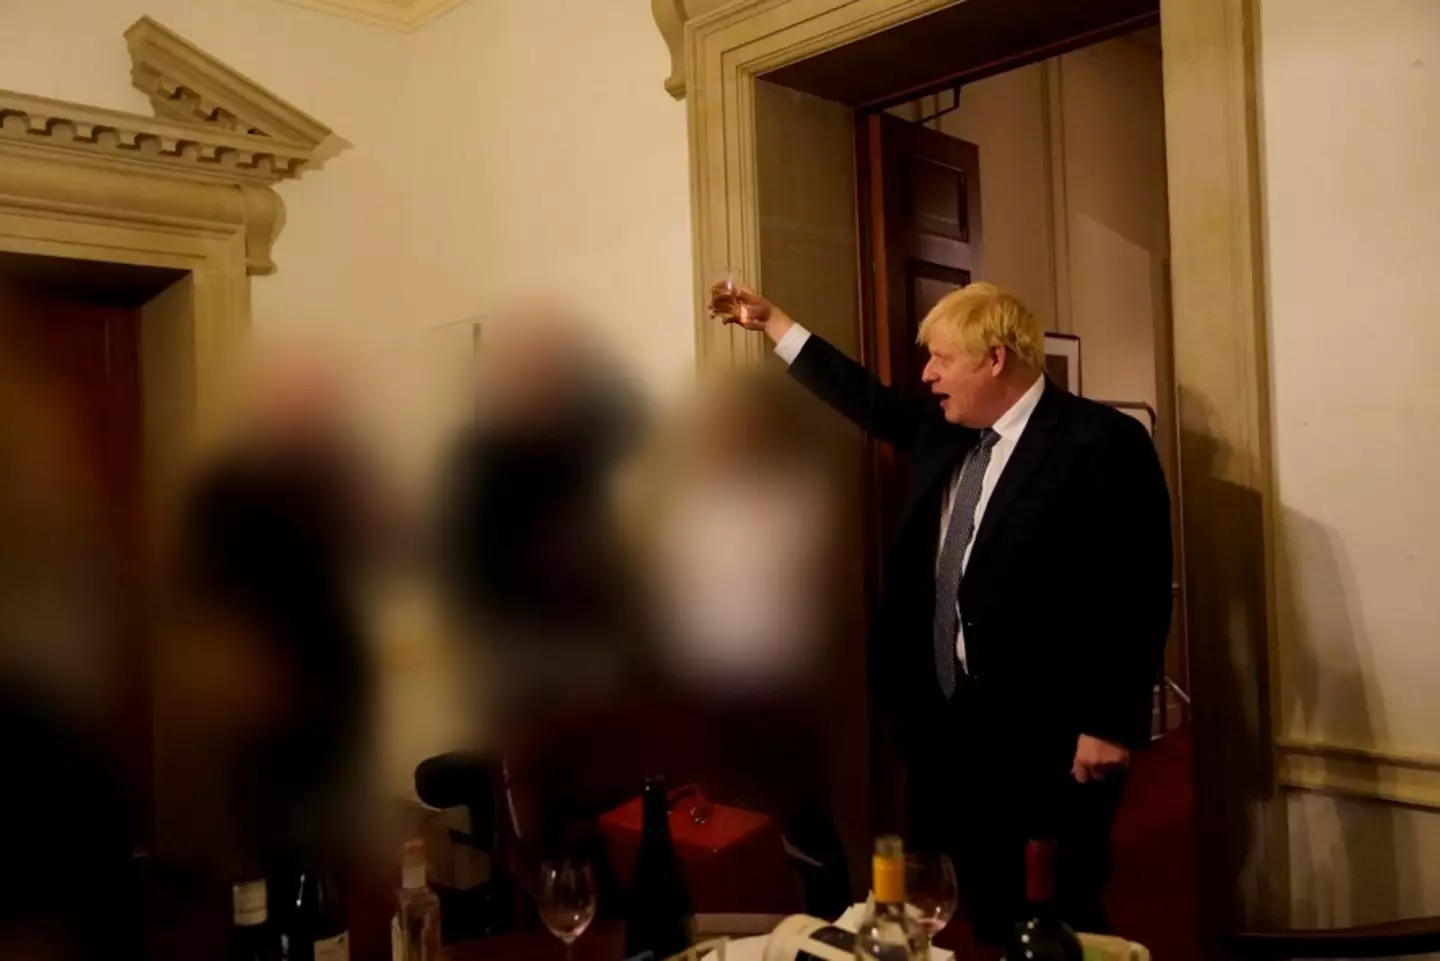 The Prime Minister drinking at a leaving party for a special advisor on 13 November 2020.